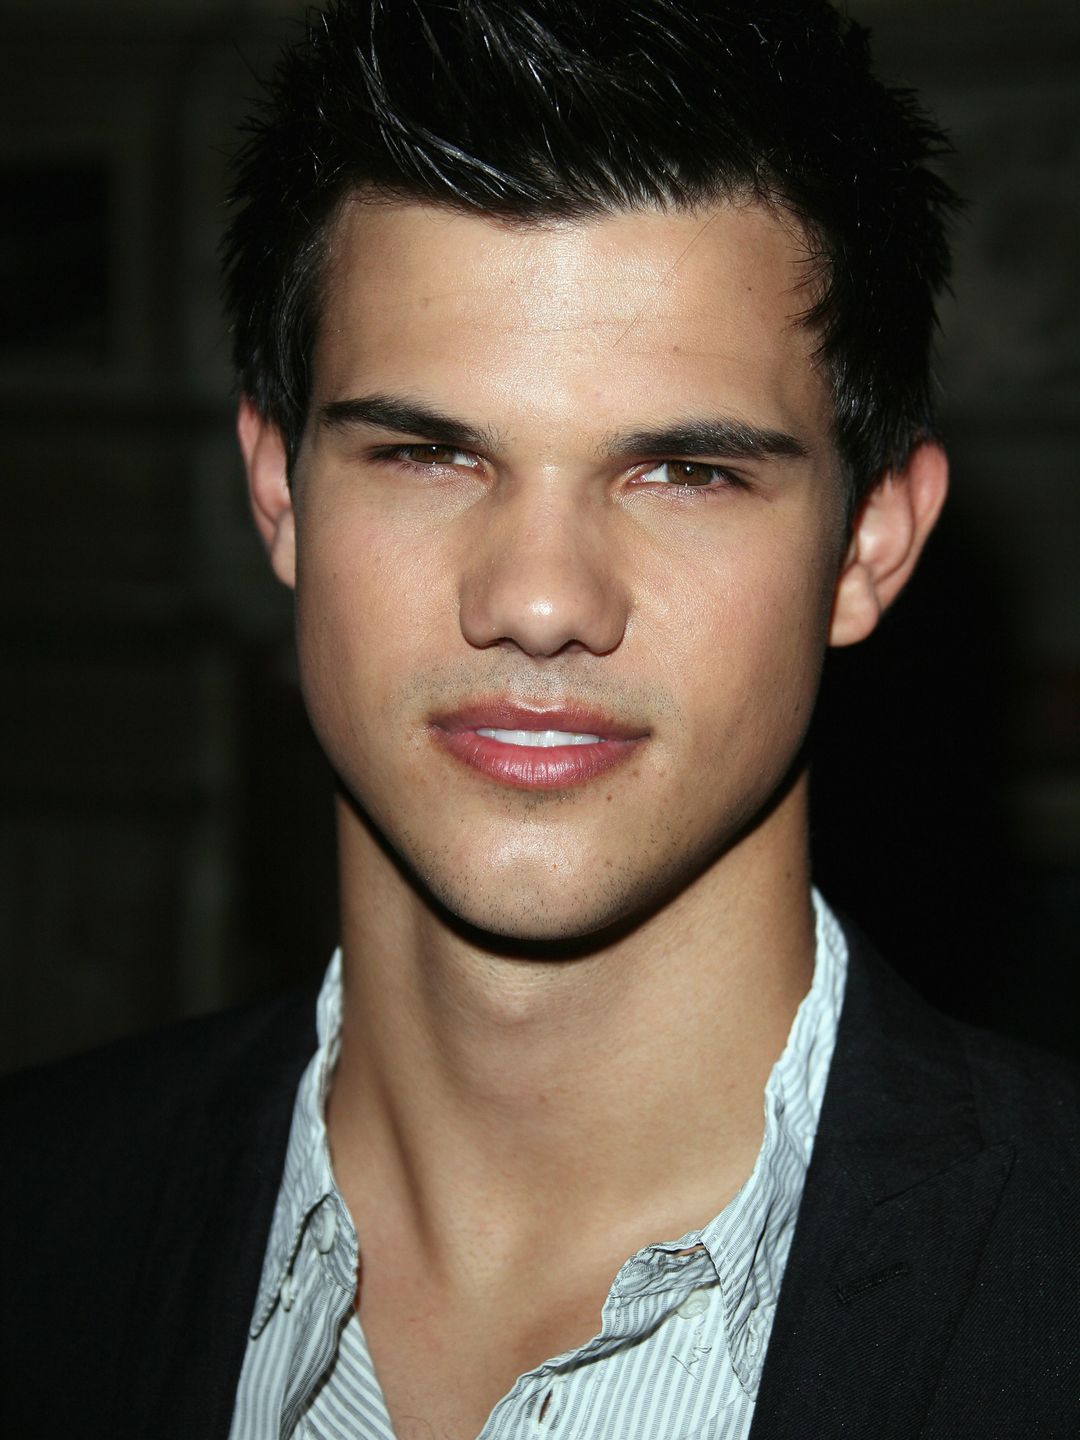 Taylor Lautner early career